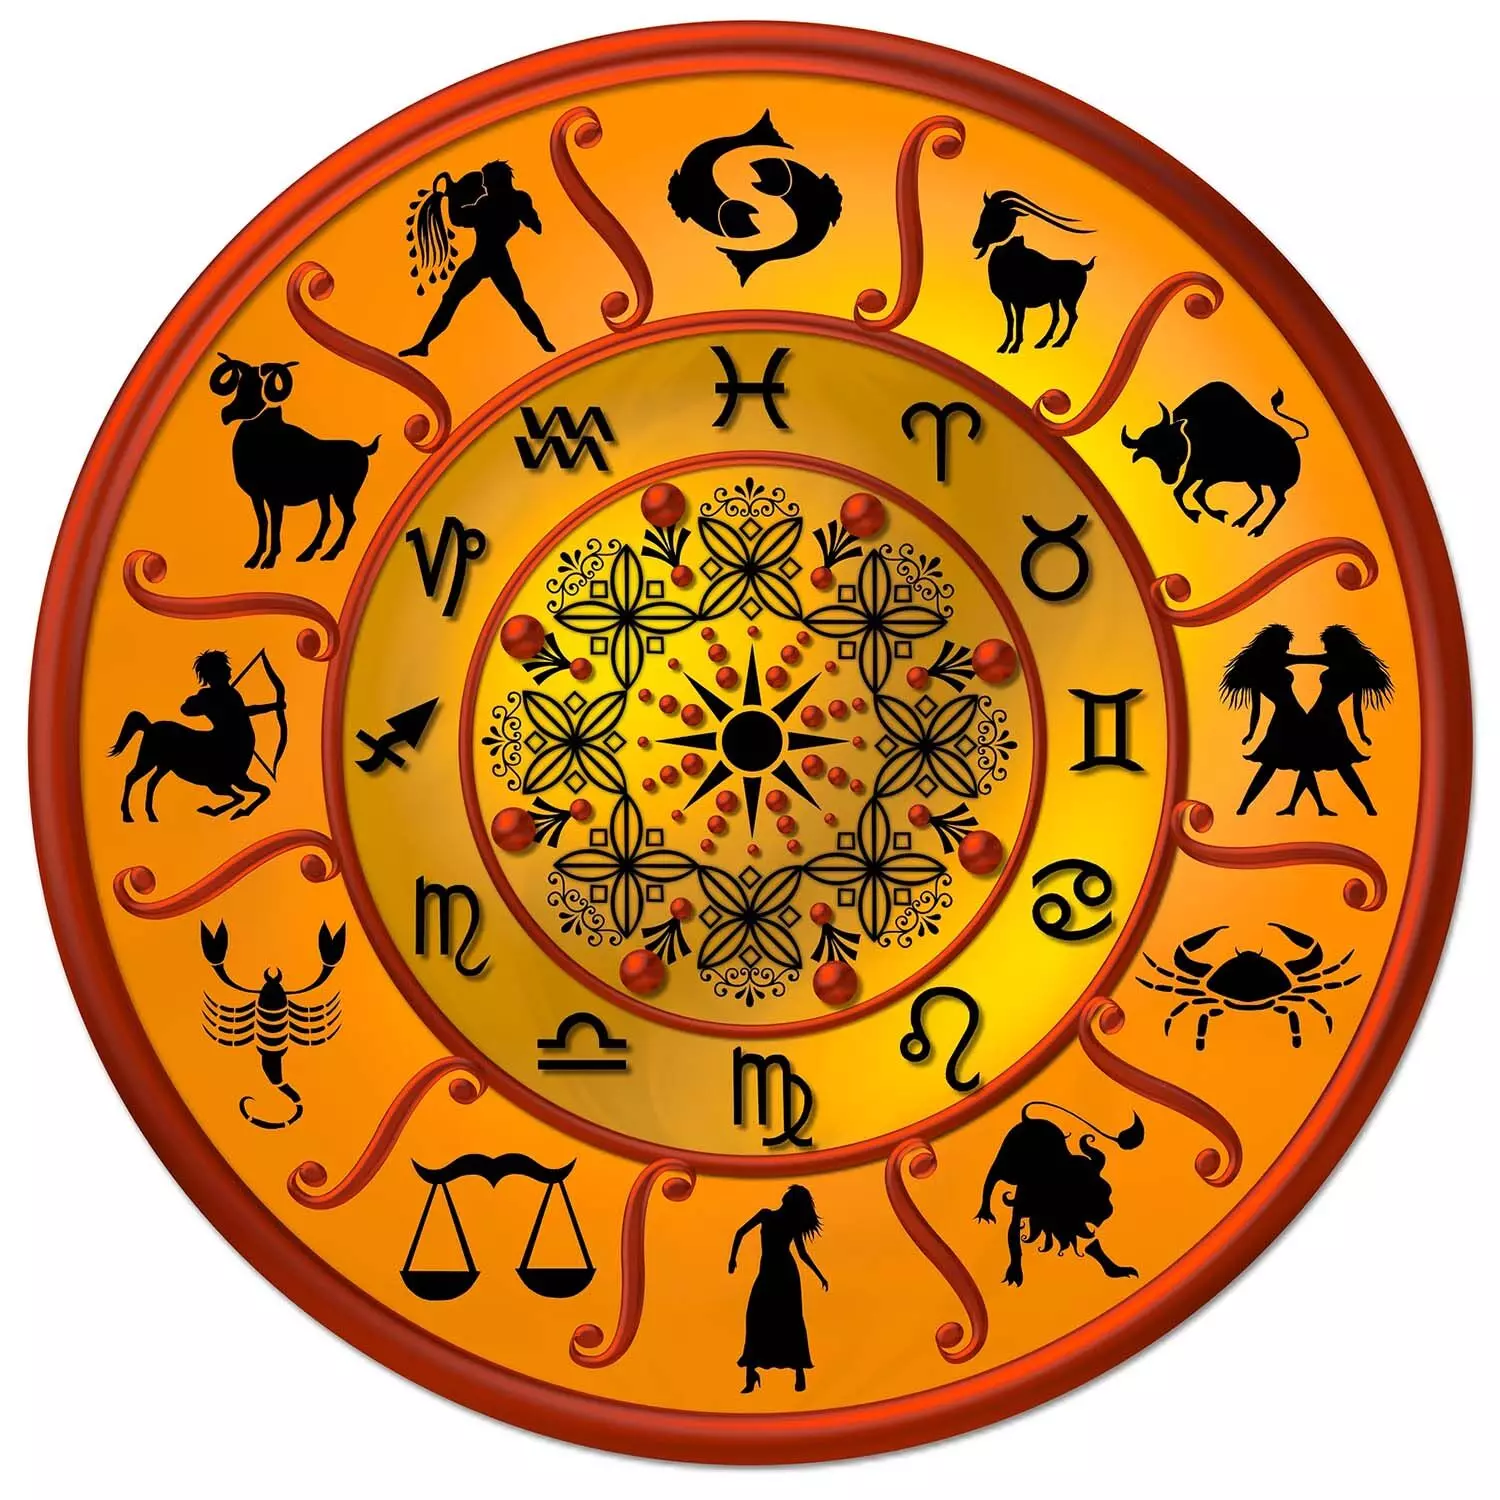 10 July – Know your todays horoscope